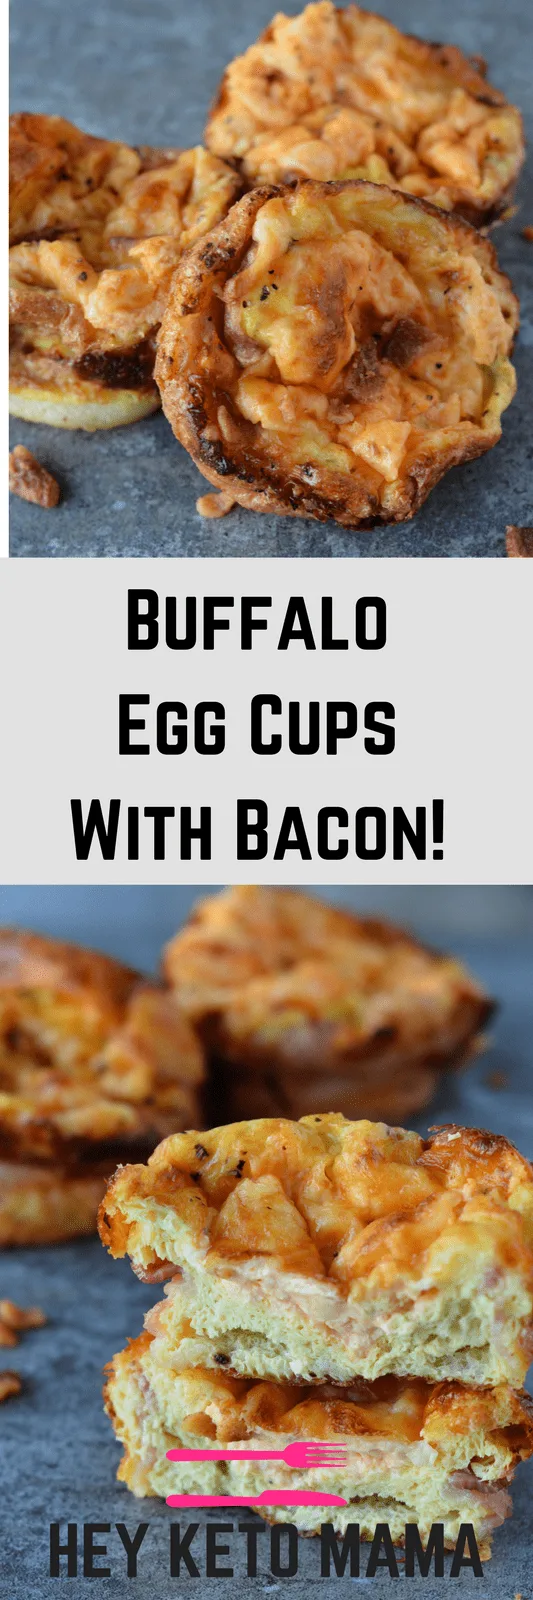 These buffalo egg cups with bacon are your ticket to a quick and easy low carb breakfast! | heyketomama.com